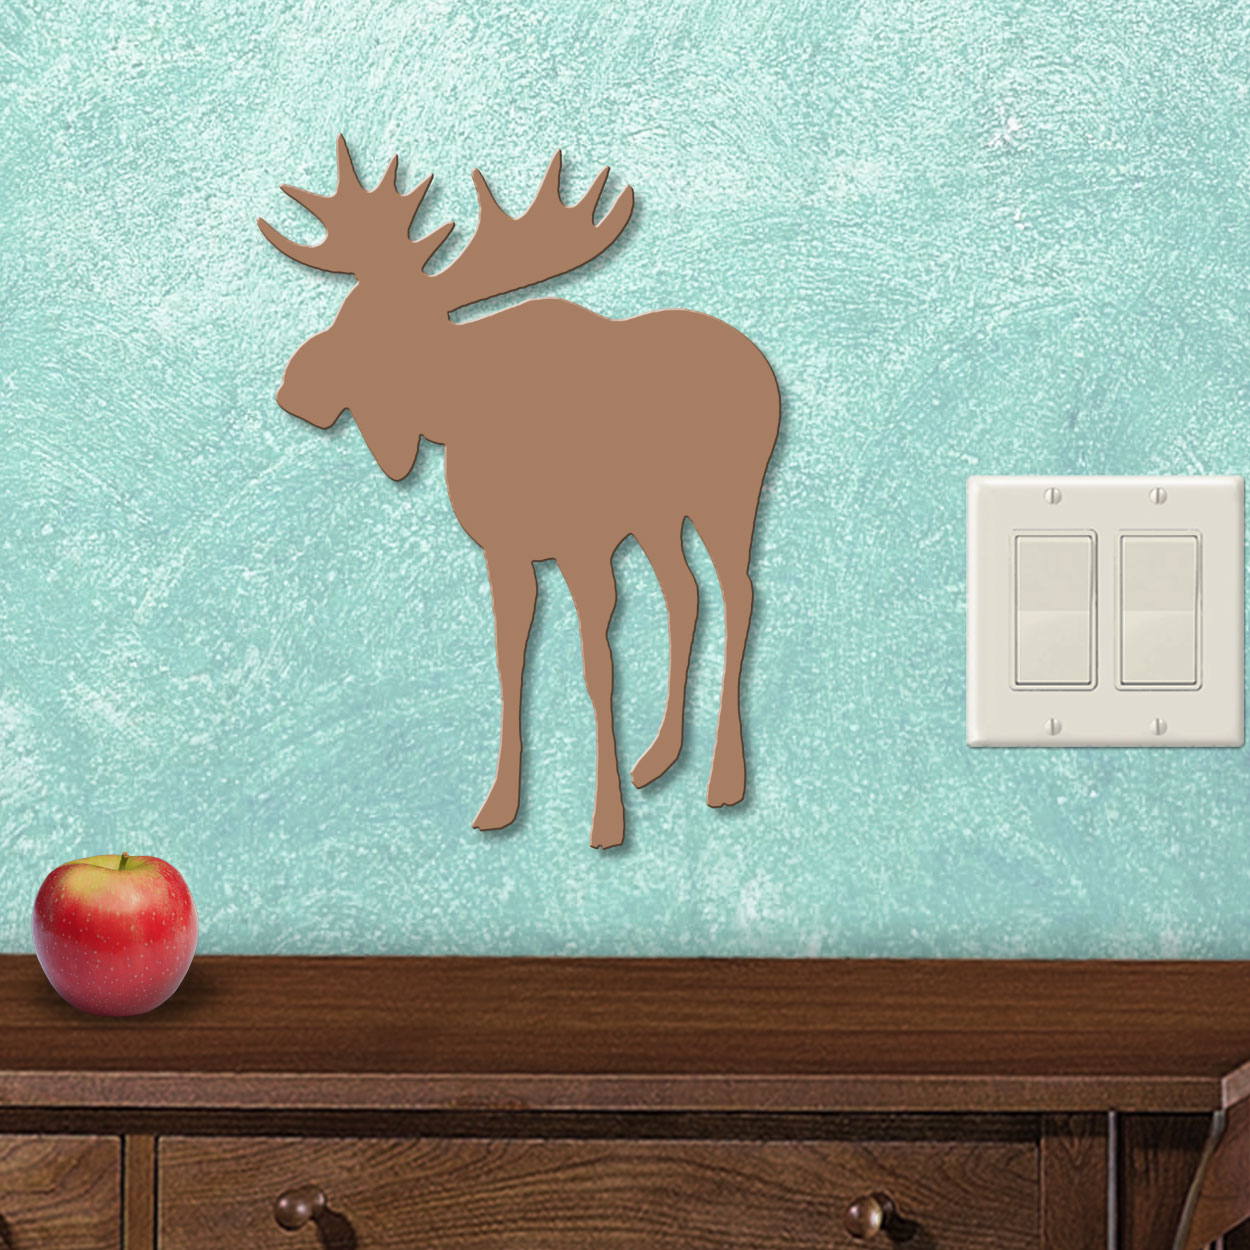 625466S - Moose Left Lodge Decor Small 12in Wall Art - Choose Color